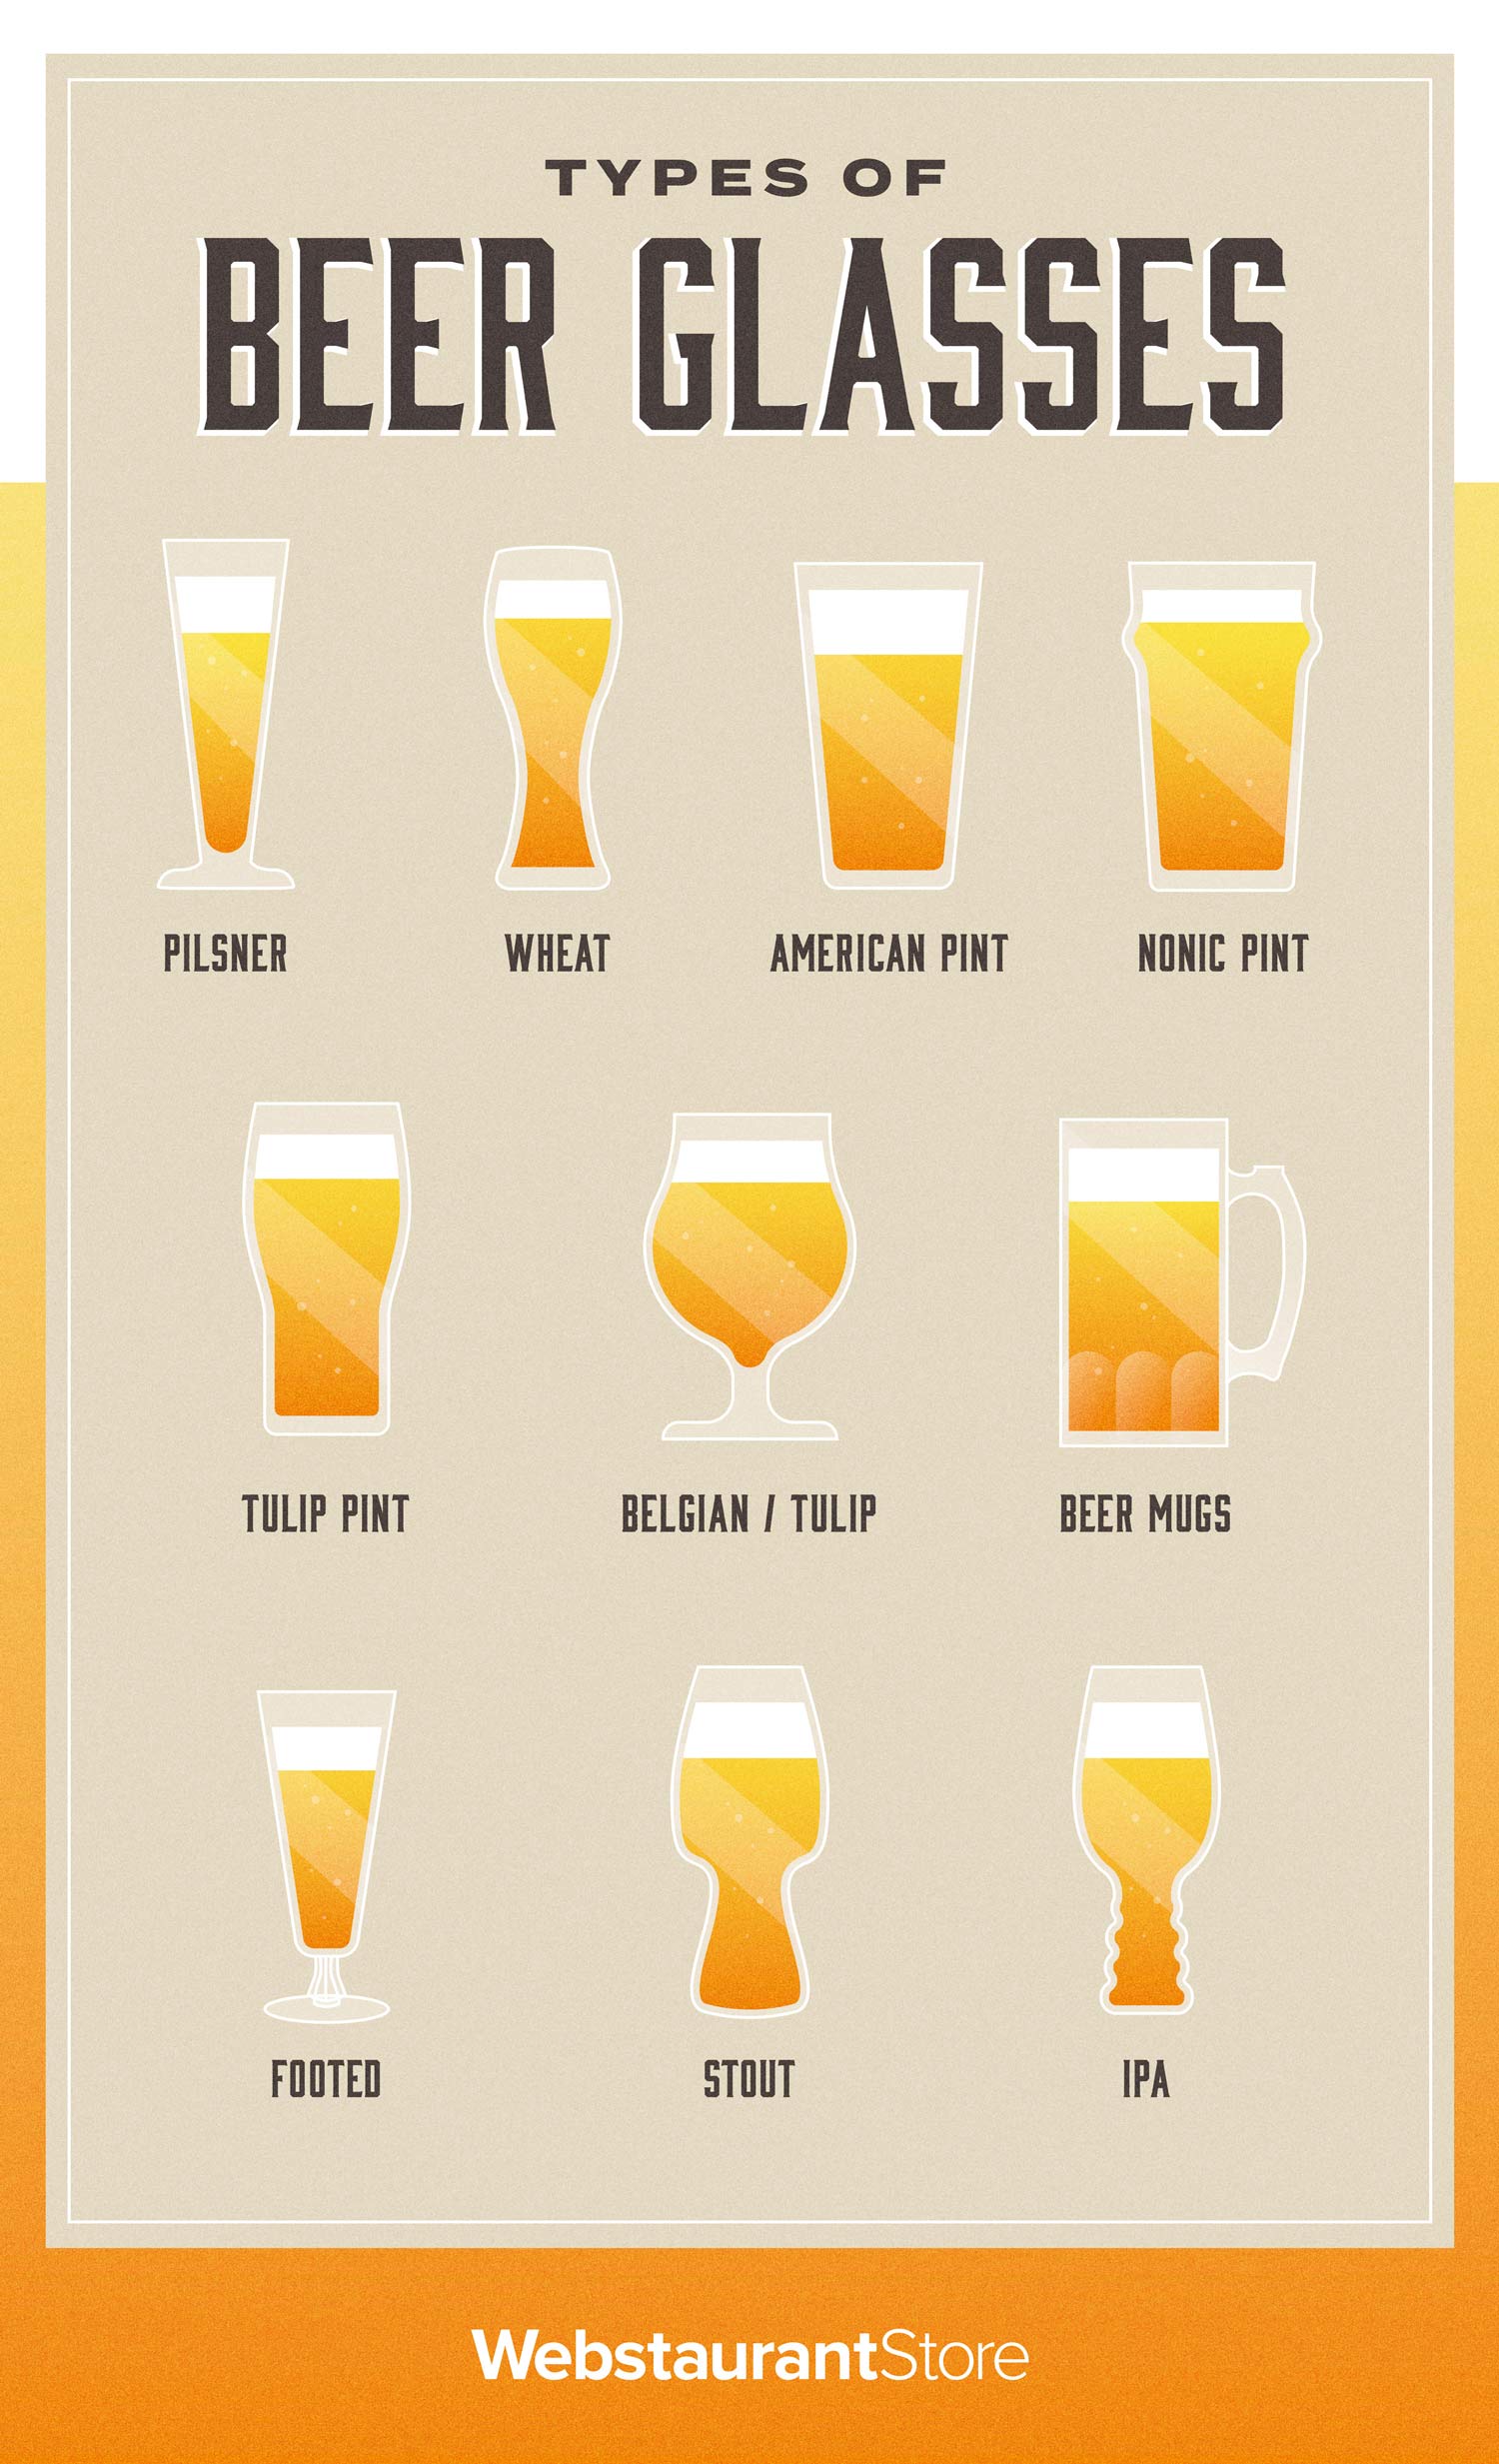 Beer Glass Buying Guide: Types, Shapes, Sizes Explained